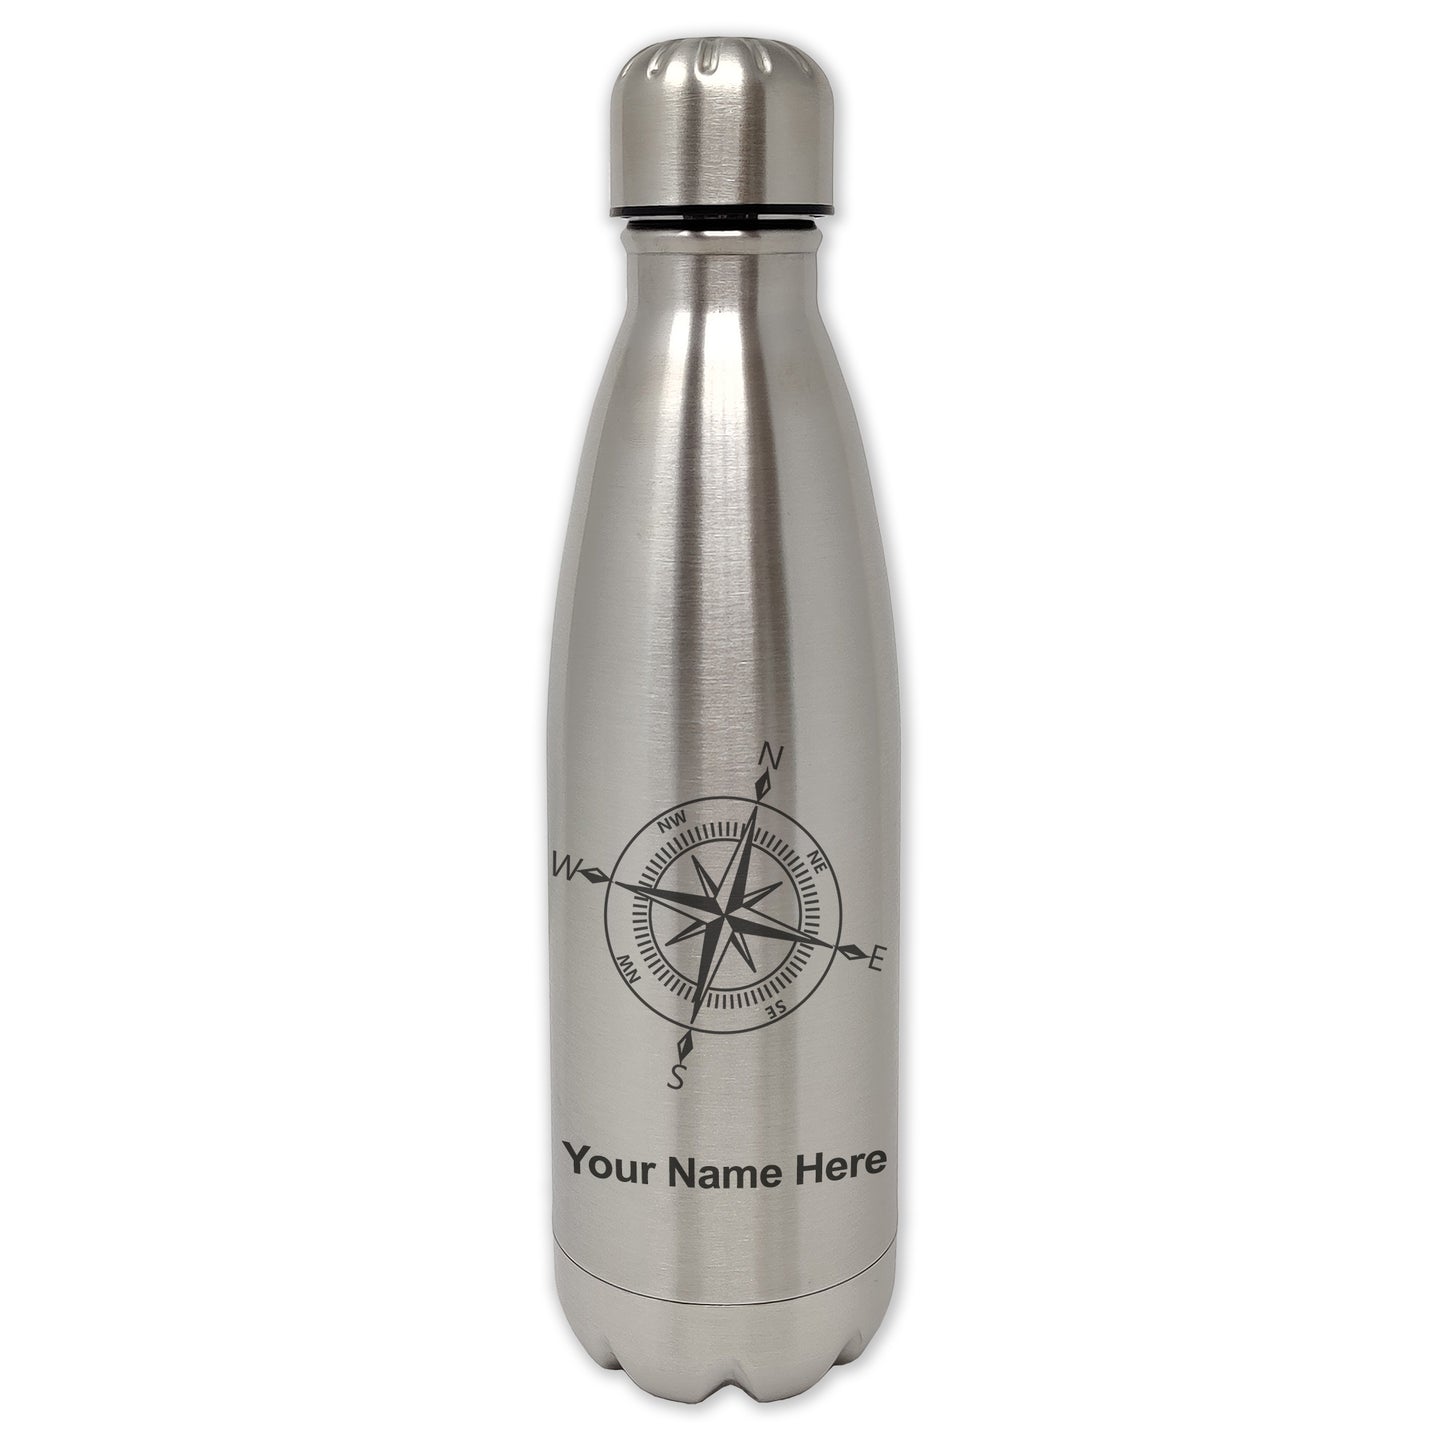 LaserGram Double Wall Water Bottle, Compass Rose, Personalized Engraving Included